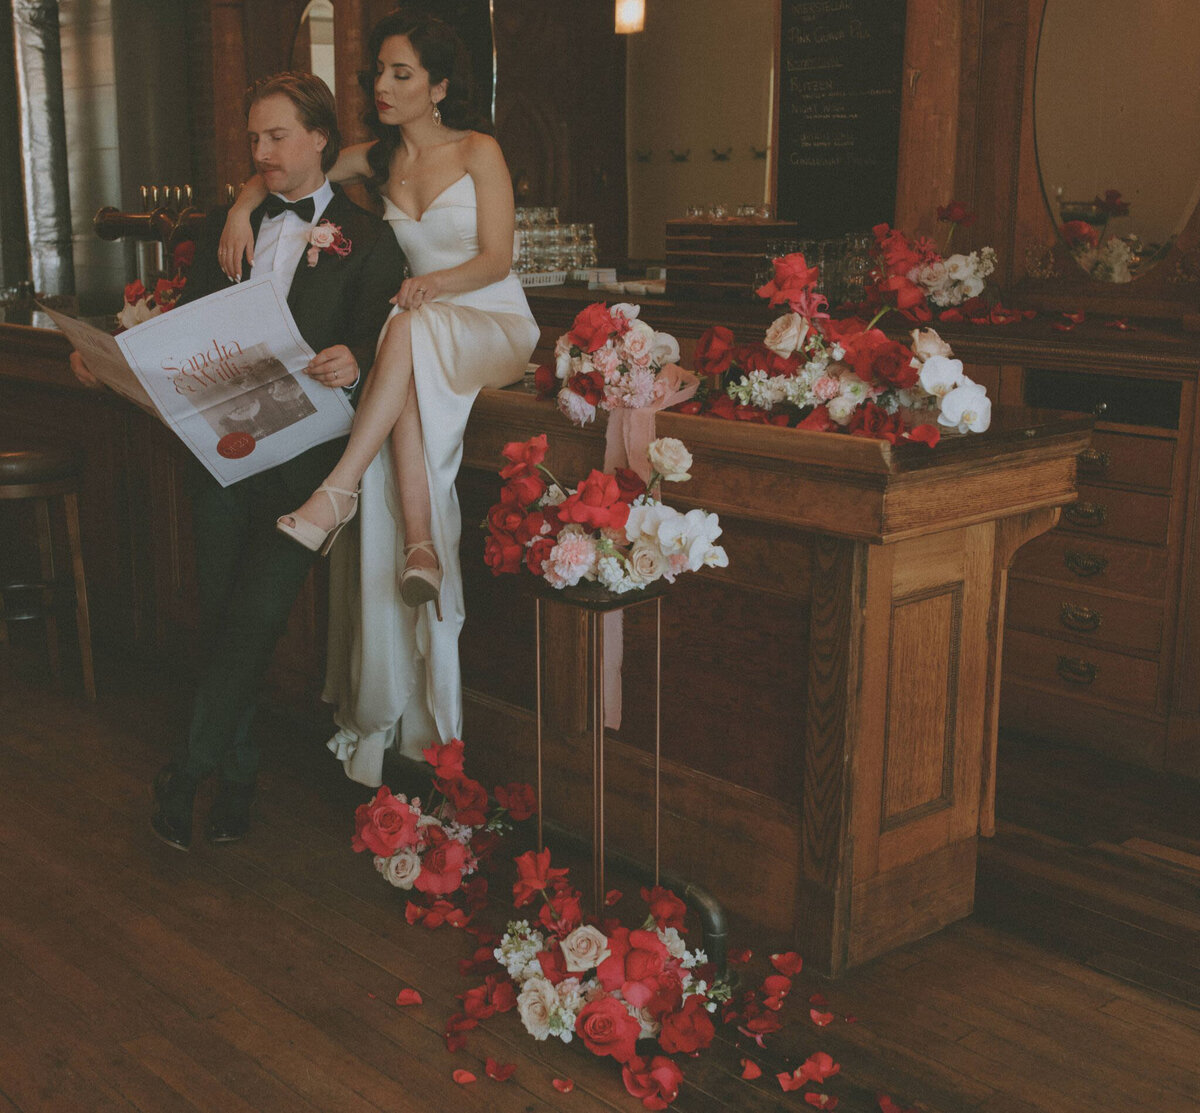 Gorgeous Old Hollywood inspired florals by Moonlight Flowers, trendy and lush floral shop located in Sparwood, BC featured on the Brontë Bride Vendor Guide.